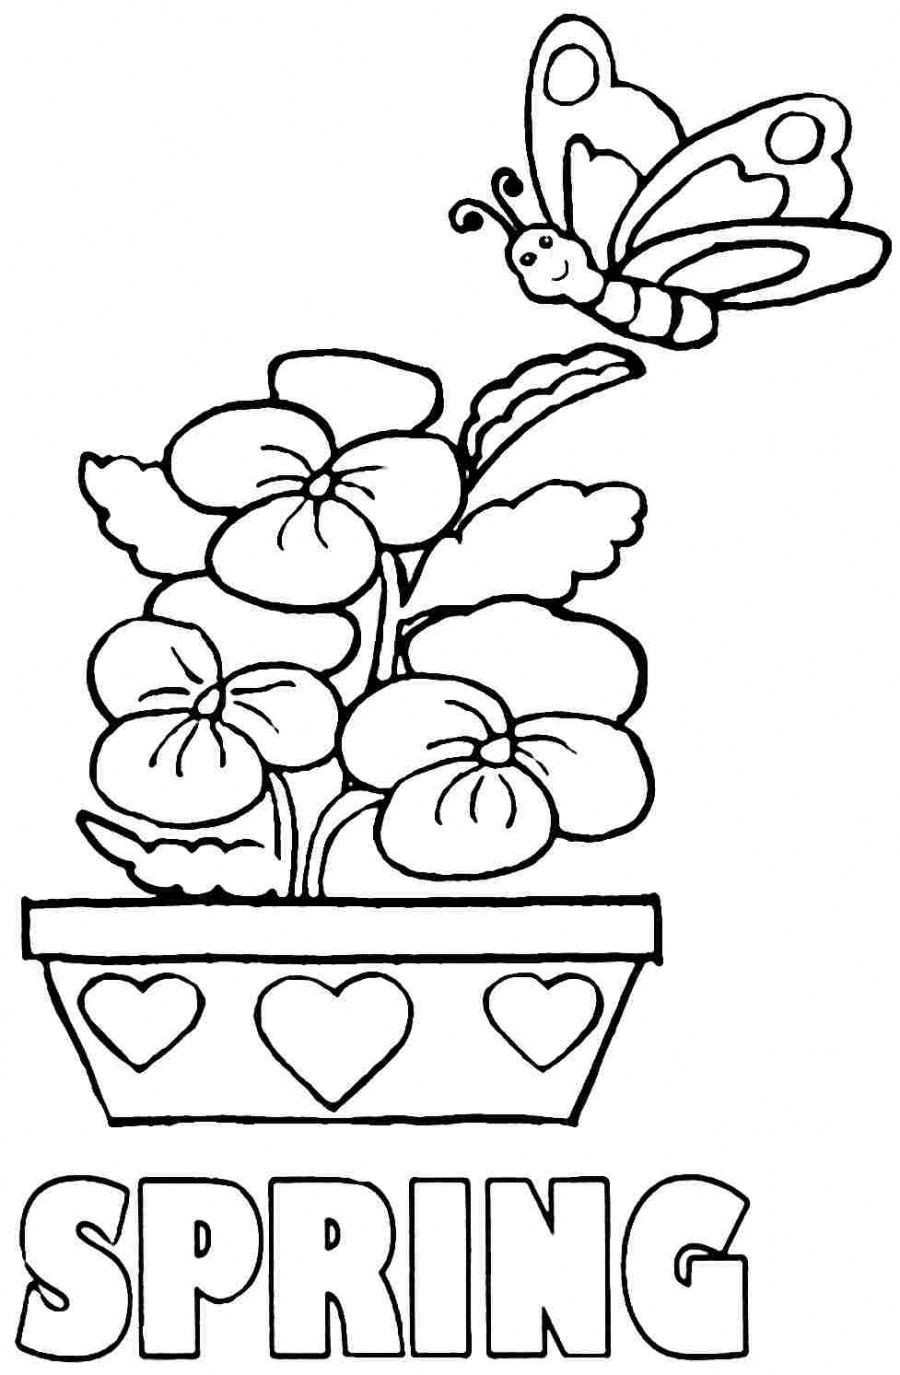 Spring Coloring Pages For Preschoolers at GetDrawings Free download